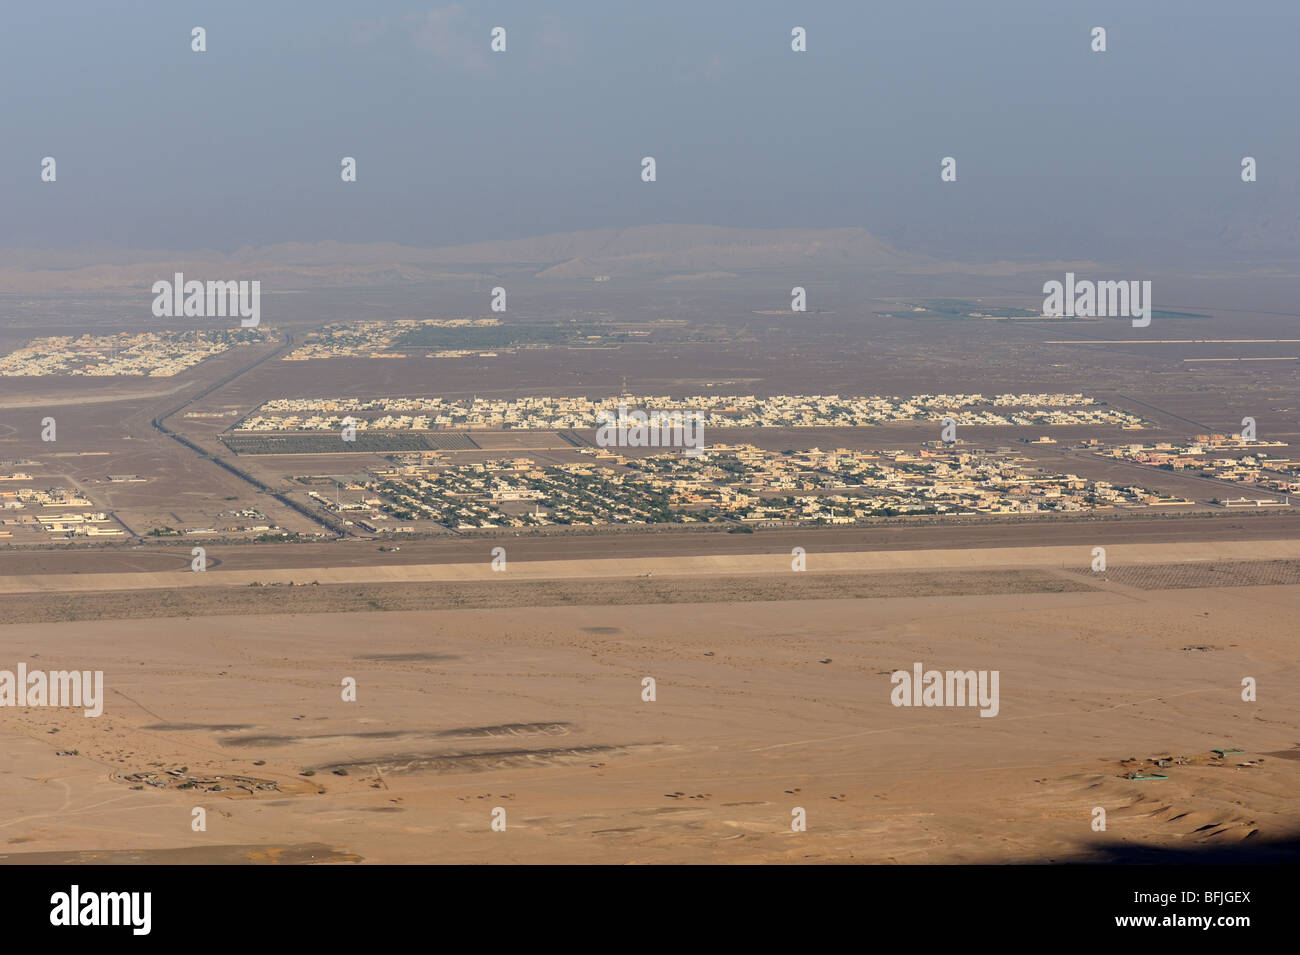 View from Jebel Hafeet mountain of single story buildings and town in oasis town of Al Ain, UAE Stock Photo